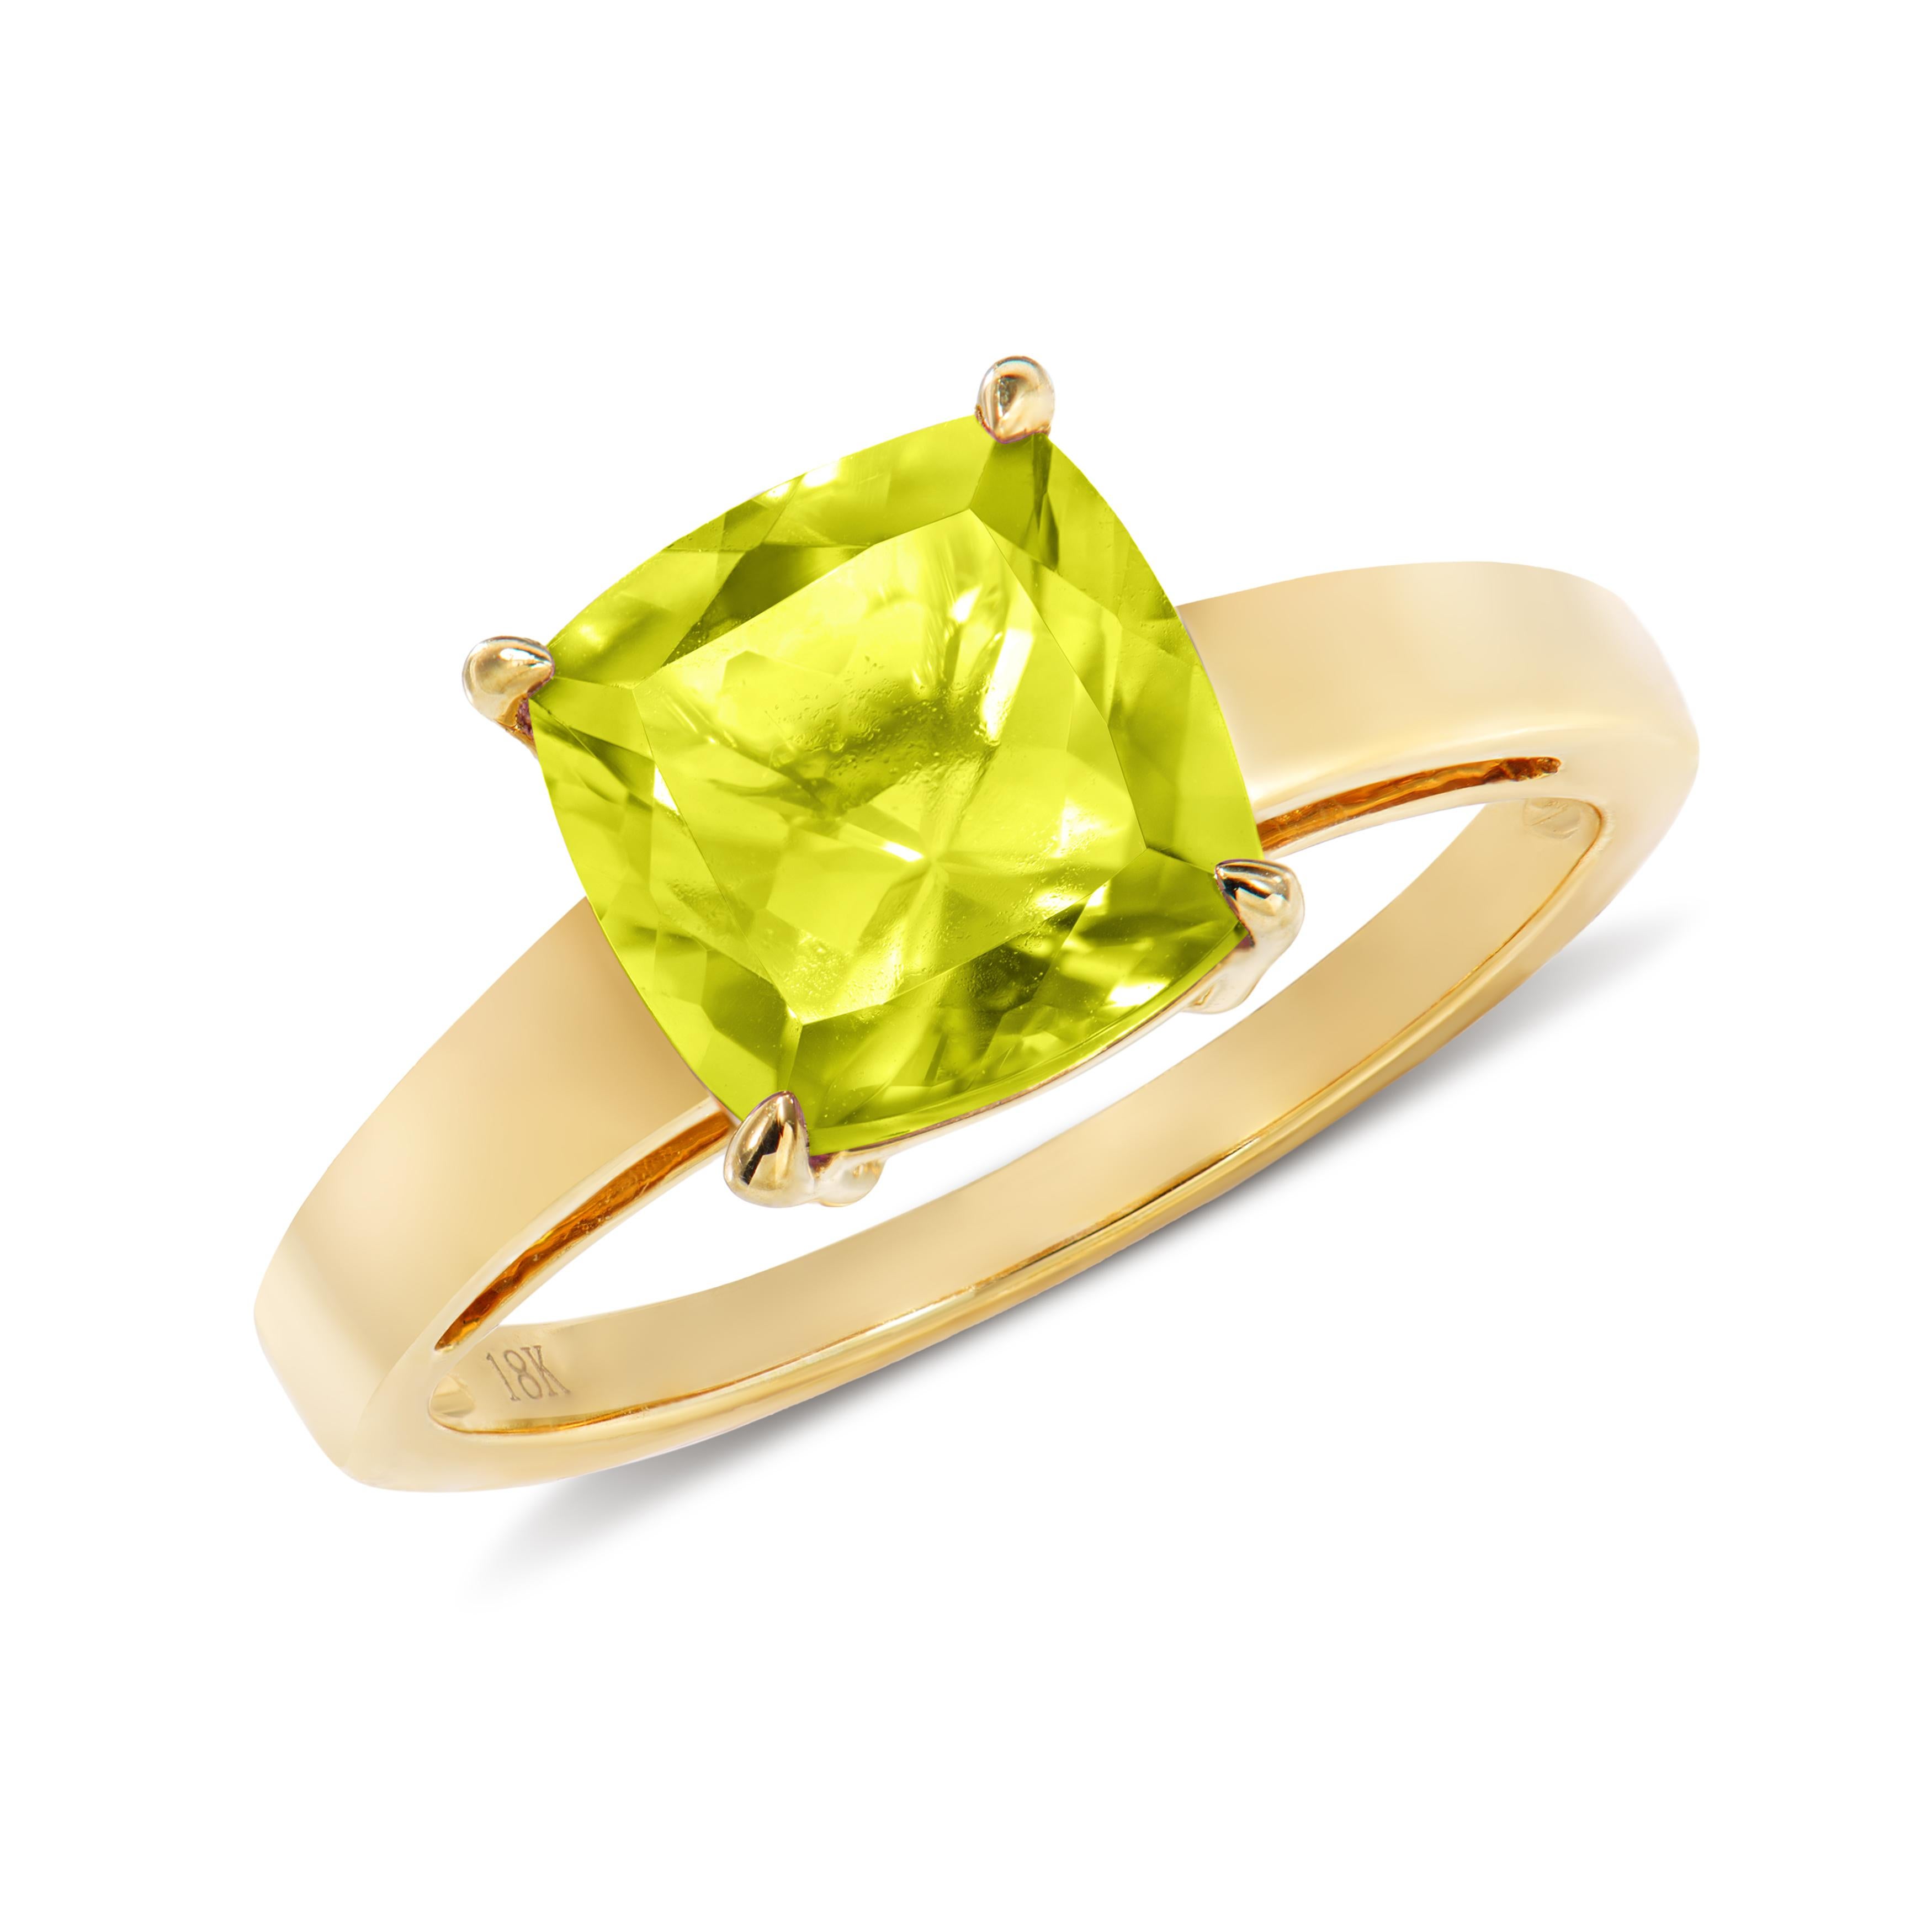 Presented A lovely collection of gems, including Peridot, Amethyst, Sky Blue Topaz, and Swiss Blue Topaz is perfect for people who value quality and want to wear it to any occasion or celebration. The yellow gold Peridot Fancy ring offer a classic